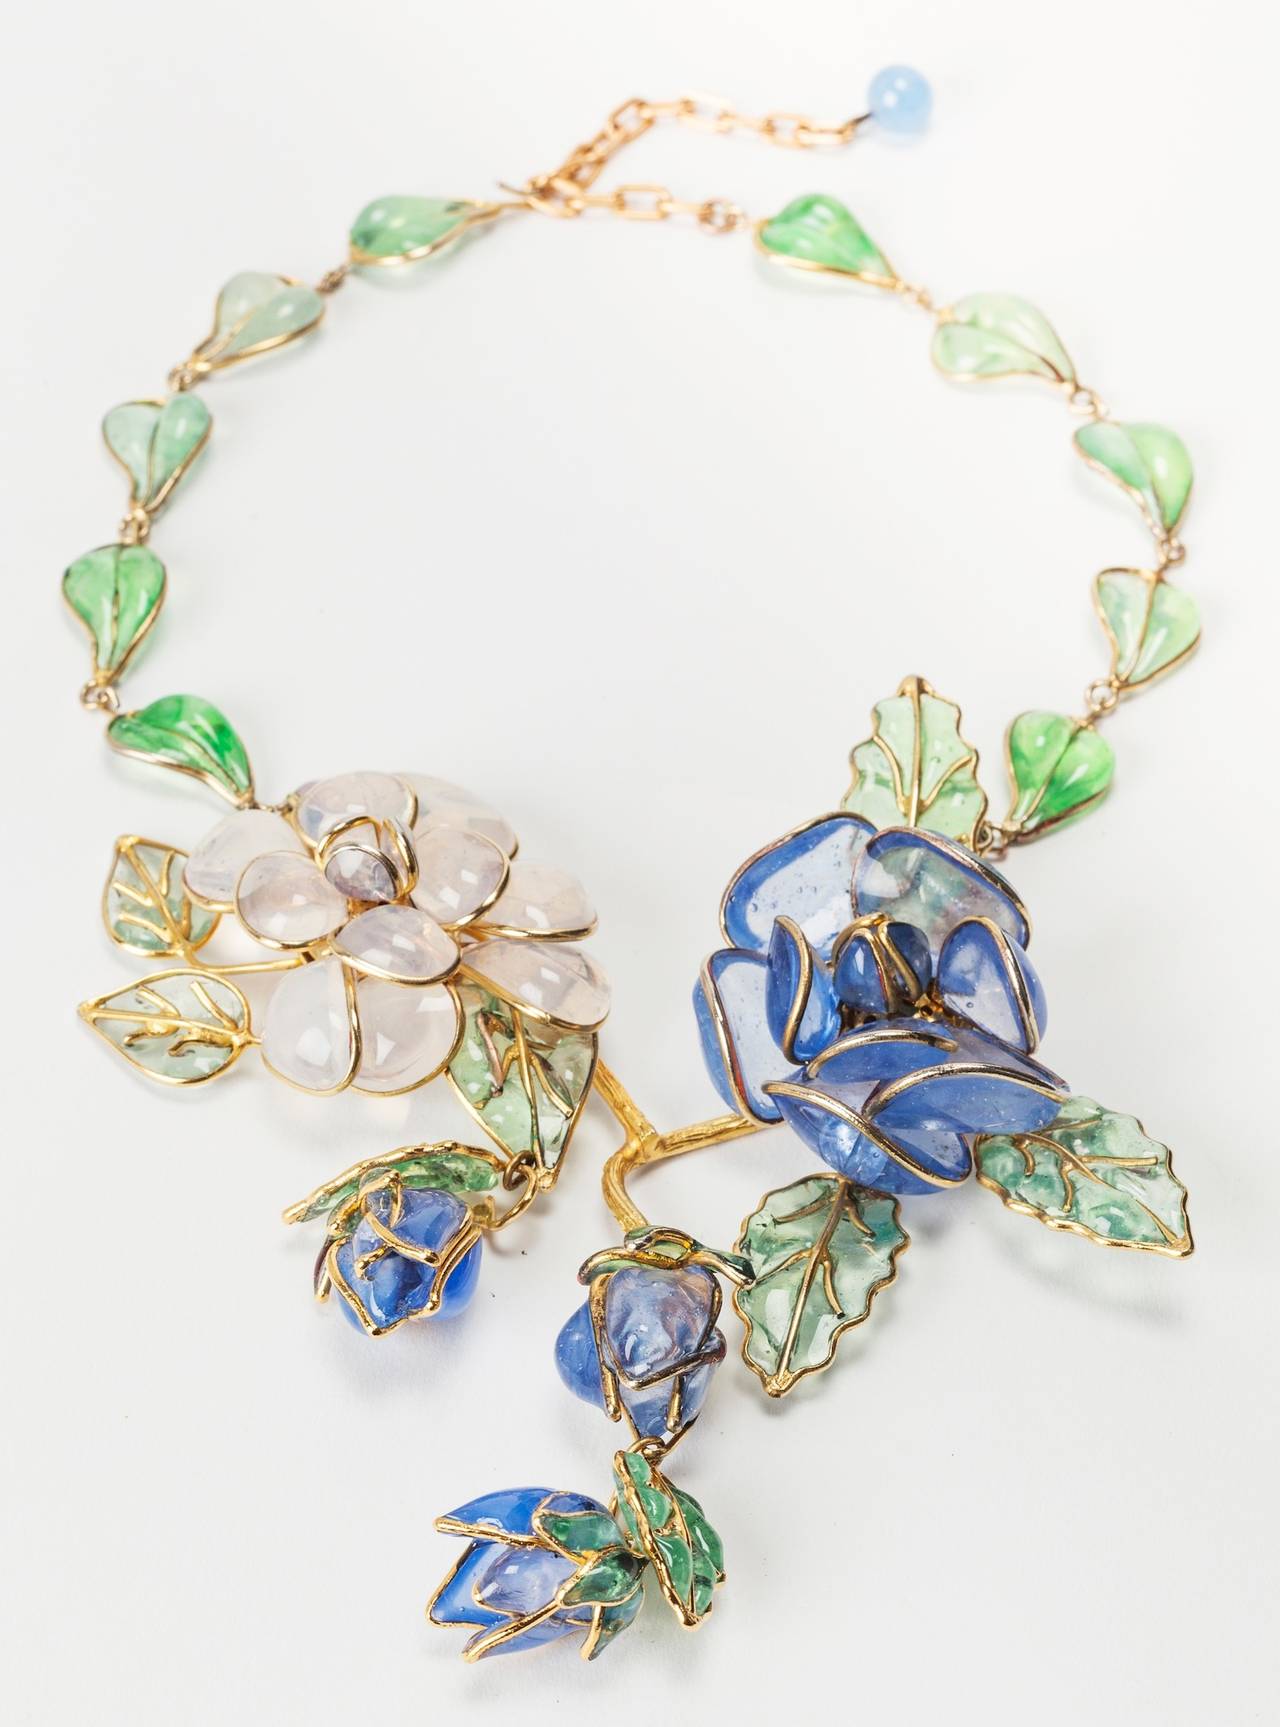 Magnificent Chanel poured glass enamel flower necklace. Made by Maison Gripoix of opaline and opal blue glass camellias and camellia buds . Further embellished with pale emerald poured glass leaves. Unsigned Haute Couture. 1950's France. Excellent